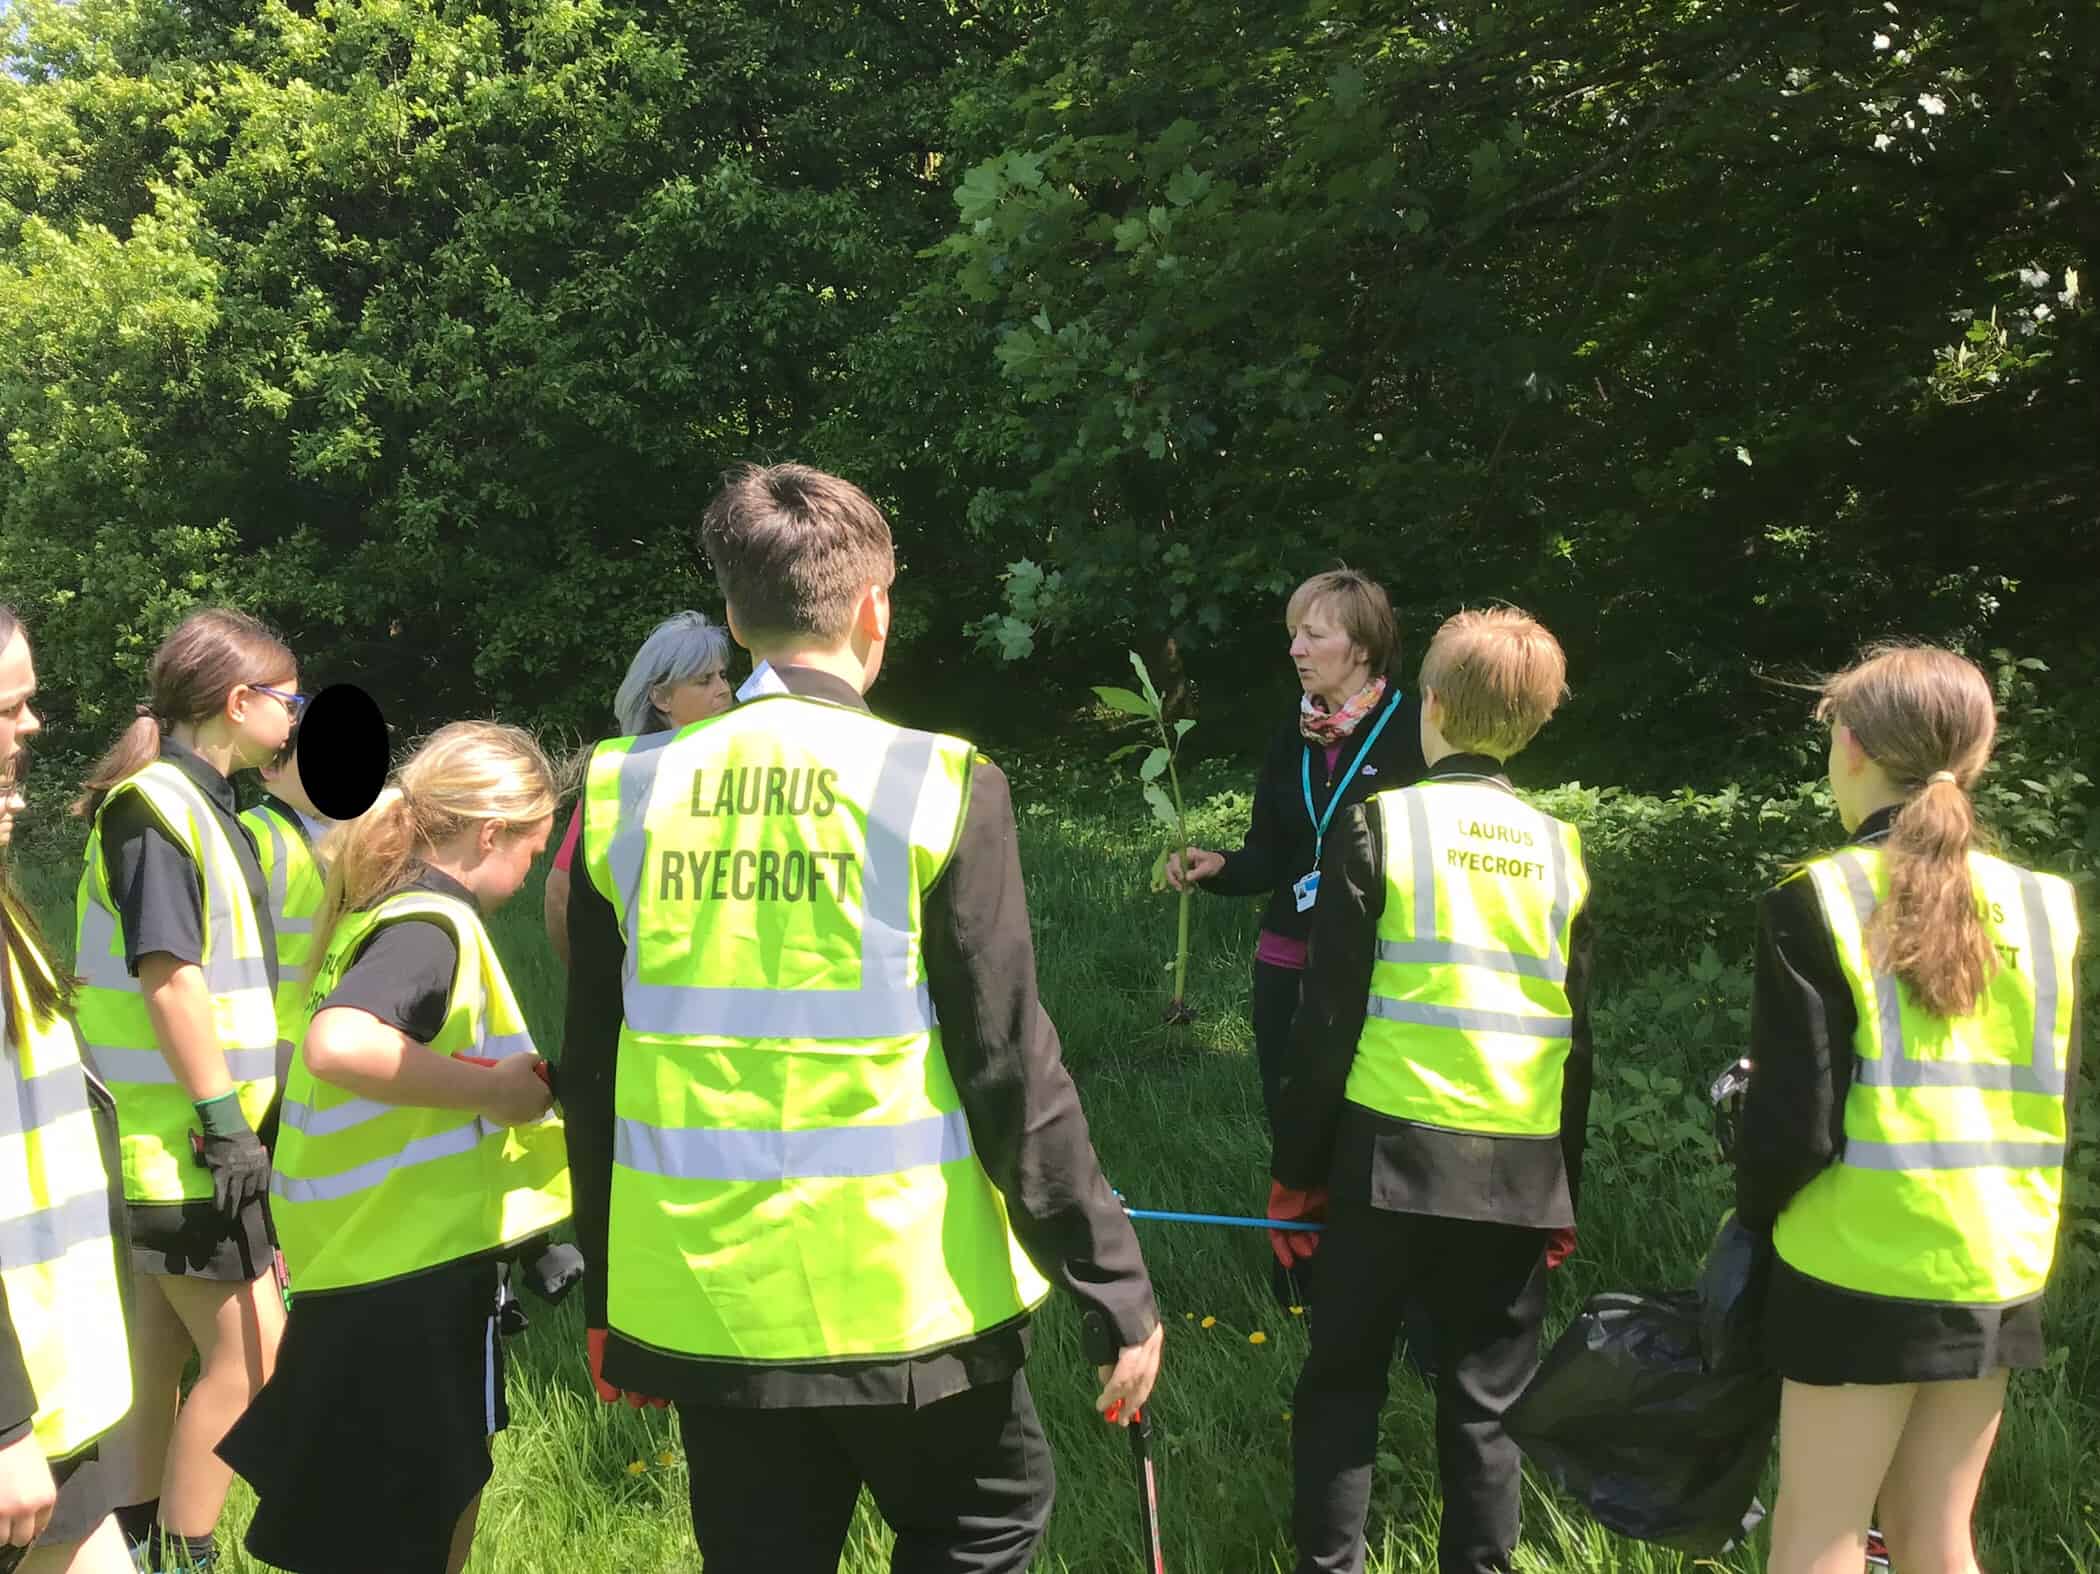 Laurus Ryecroft students take part in a litter pick as part of their active citizenship mission